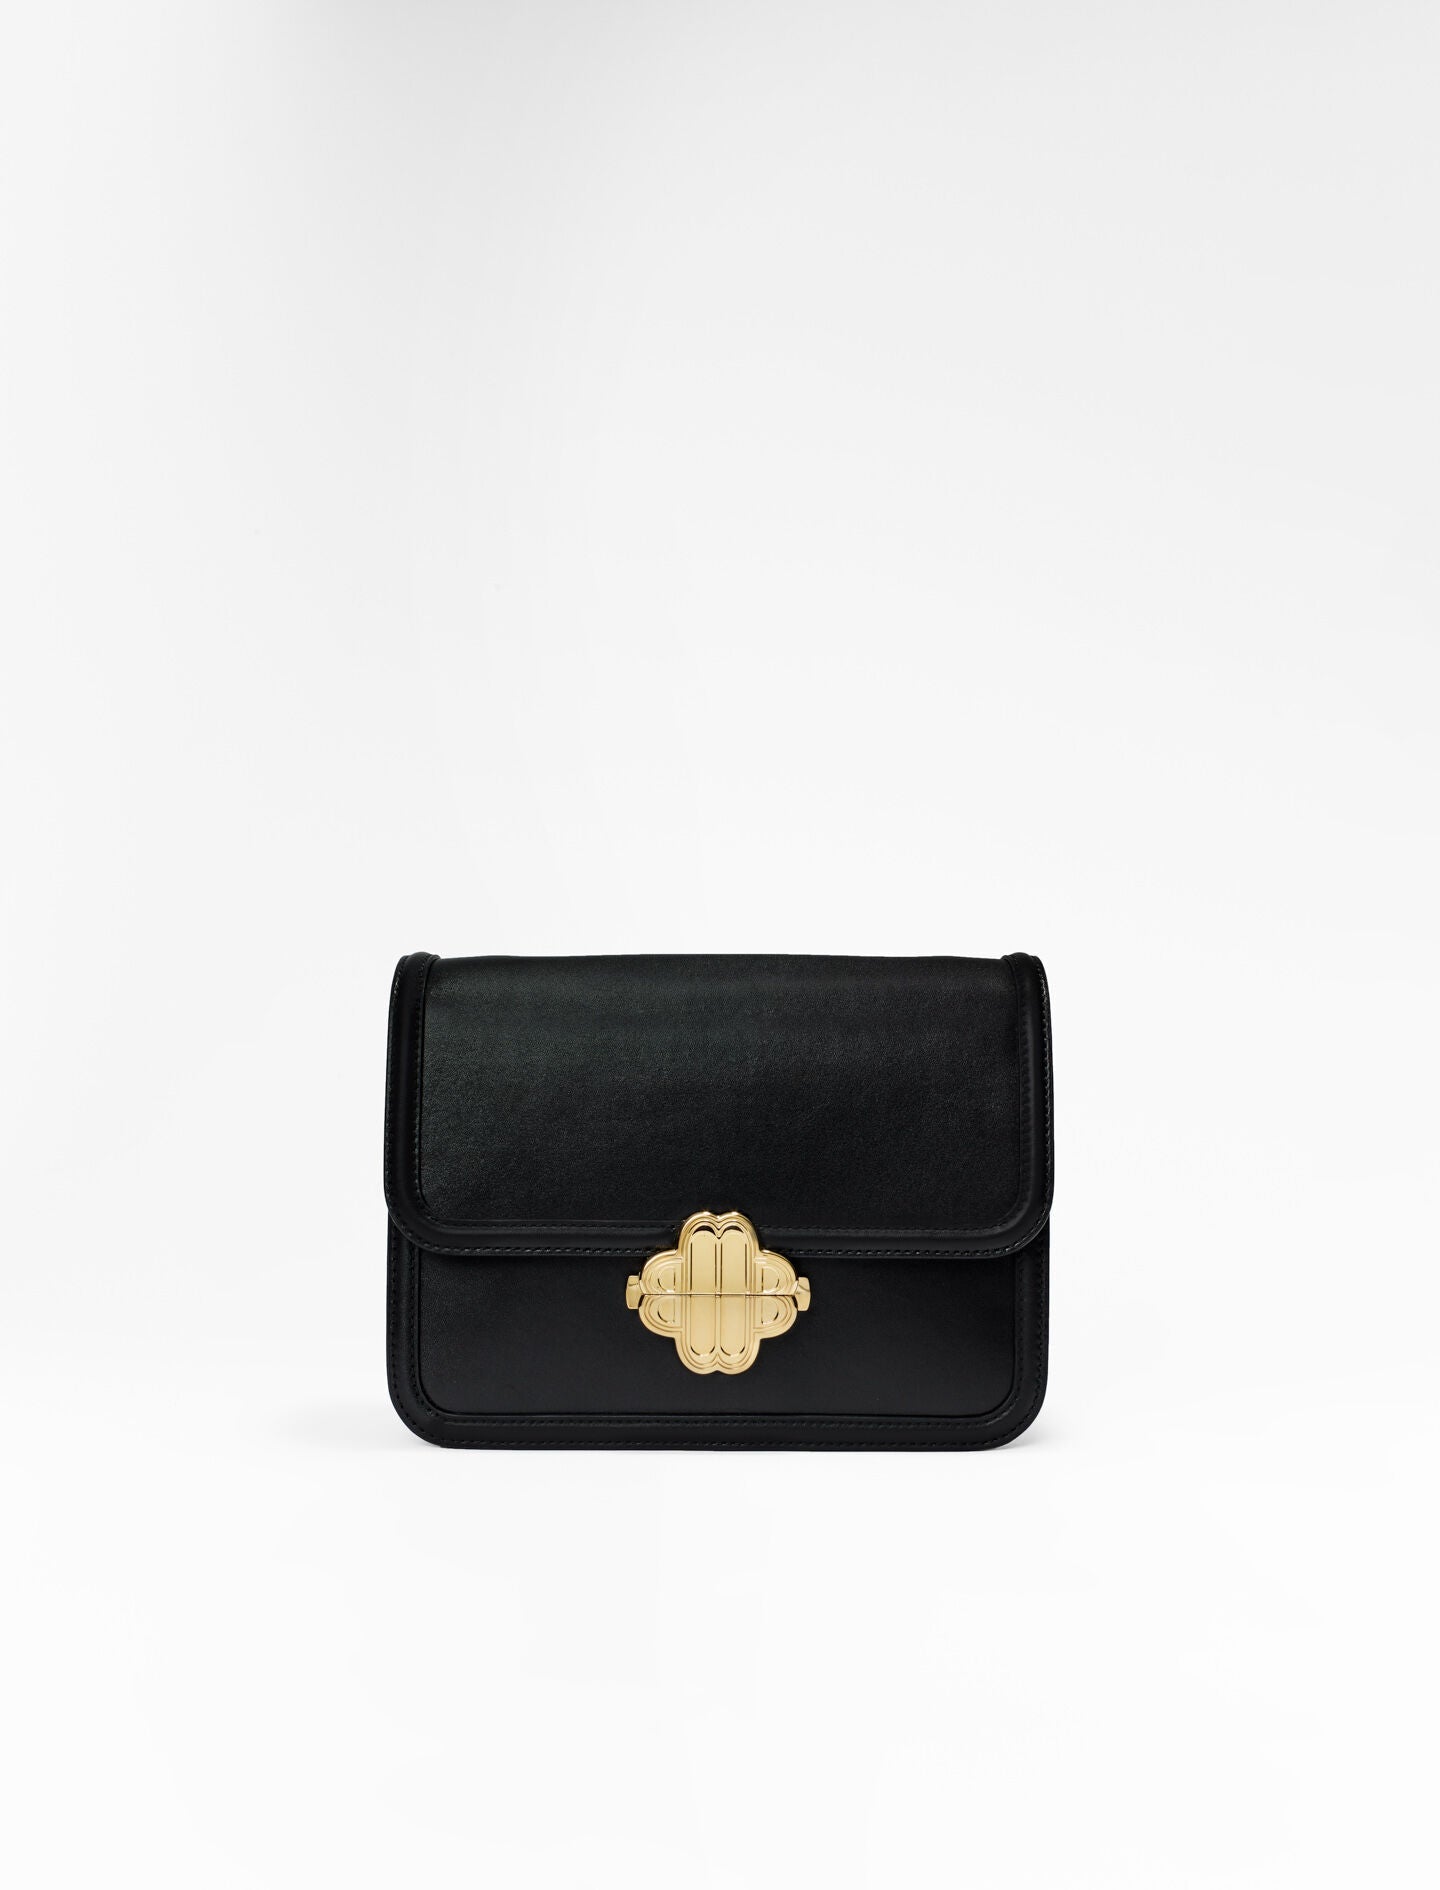 Black featured Leather bag with clover clasp